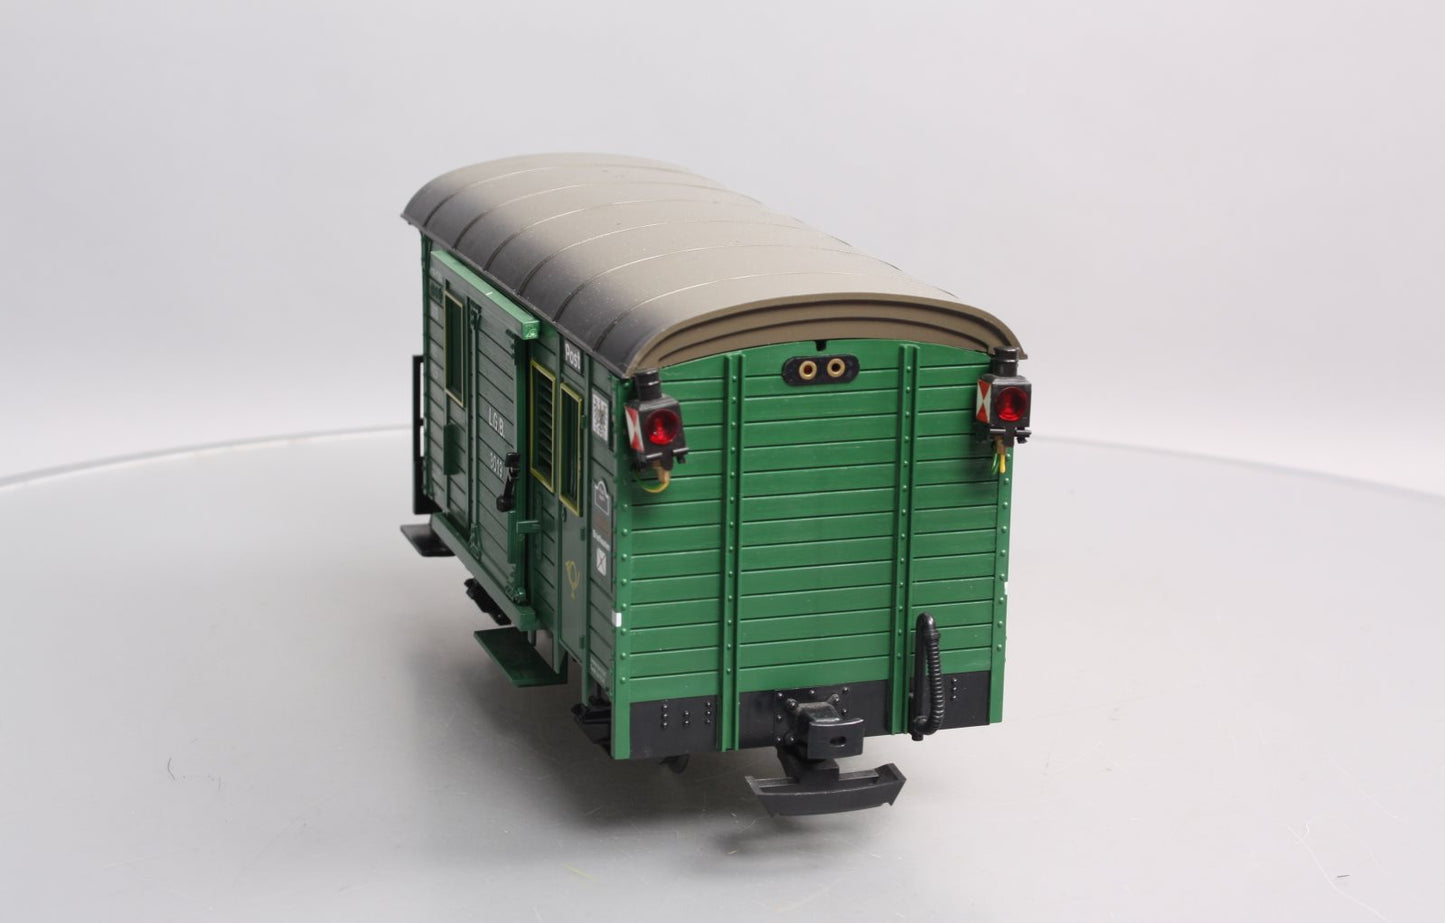 LGB 3019 G Scale Mail Post Car with Lights (Metal Wheels) VG/Box